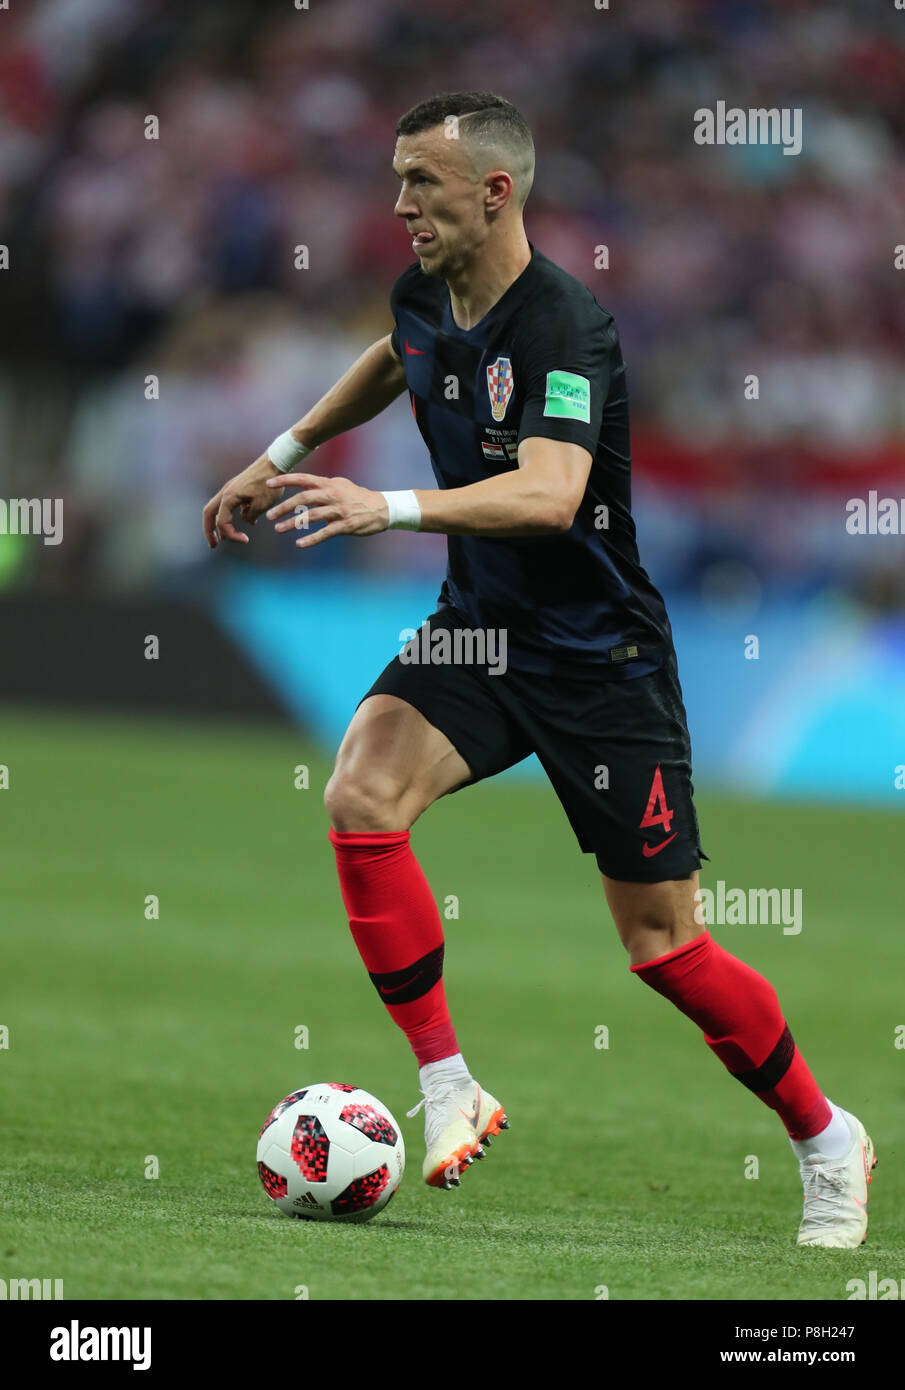 Ivan Perisic  CROATIA V ENGLAND  CROATIA V ENGLAND , 2018 FIFA WORLD CUP RUSSIA  11 July 2018  GBC9520  2018 FIFA World Cup Russia, Semi Final    STRICTLY EDITORIAL USE ONLY.   If The Player/Players Depicted In This Image Is/Are Playing For An English Club Or The England National Team.   Then This Image May Only Be Used For Editorial Purposes. No Commercial Use.    The Following Usages Are Also Restricted EVEN IF IN AN EDITORIAL CONTEXT:   Use in conjuction with, or part of, any unauthorized audio, video, data, fixture lists, club/league logos, Betting, Games or any 'live' services.    Also Re Stock Photo